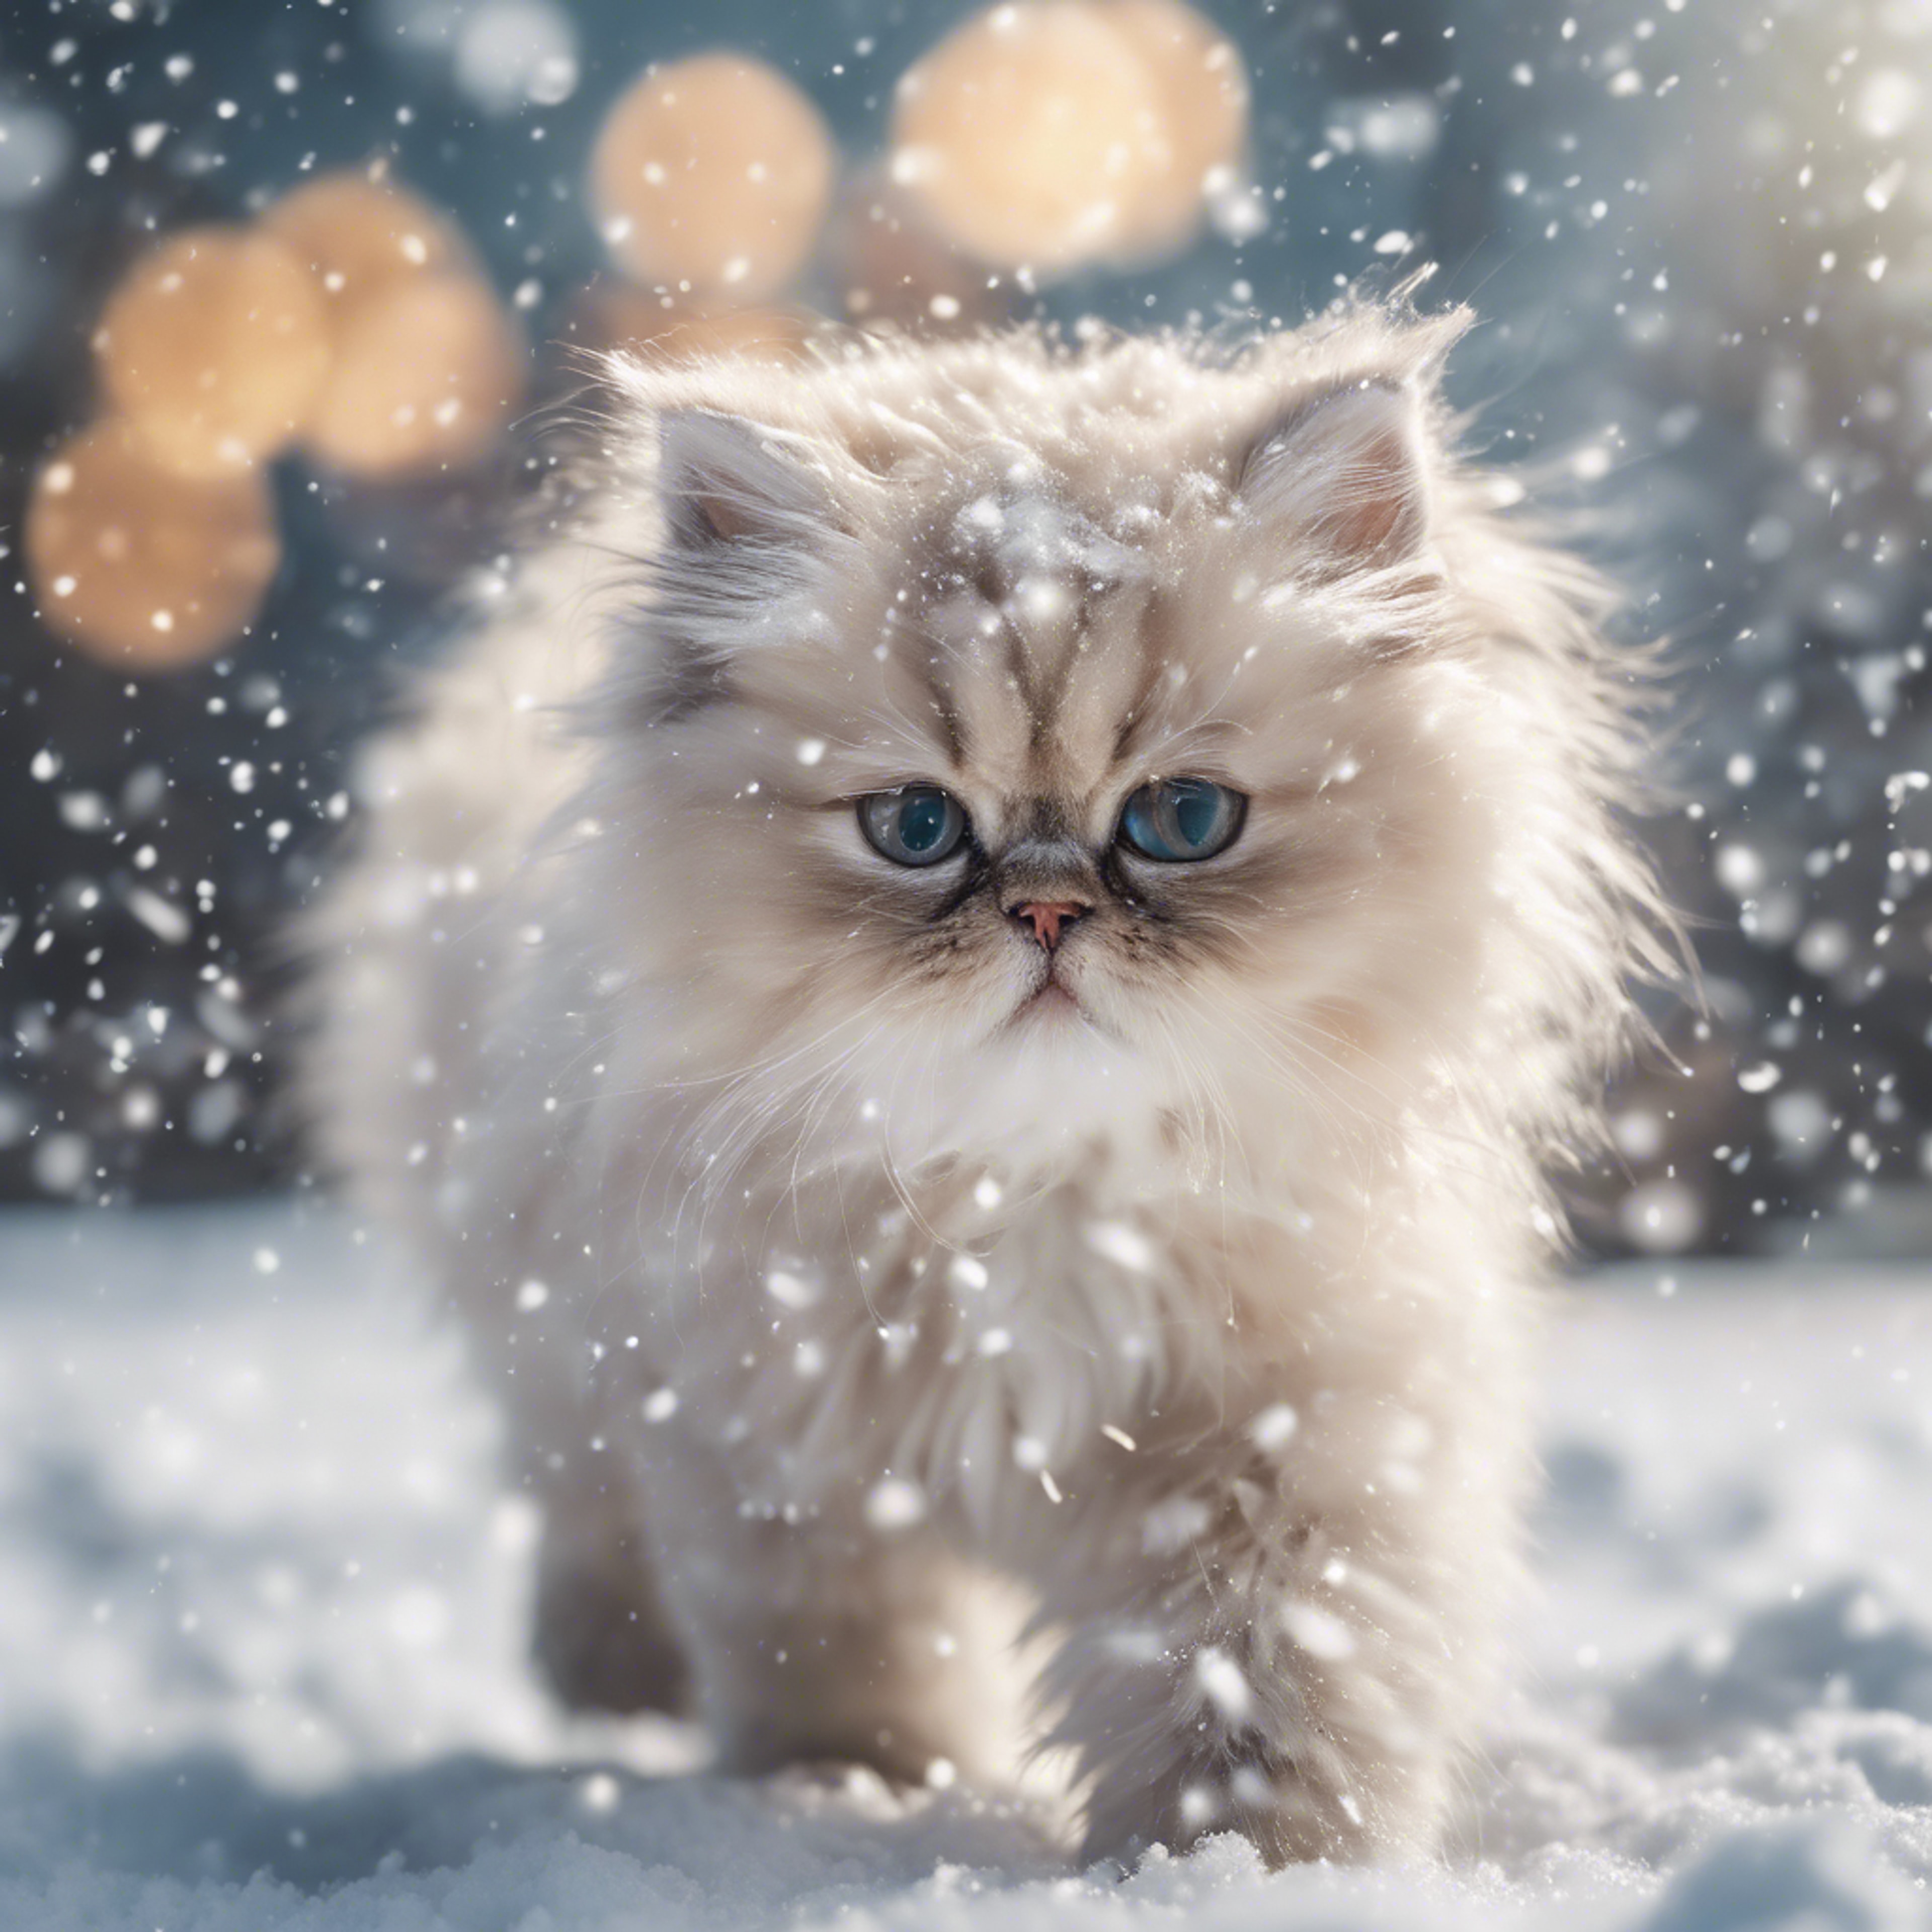 An animated winter scene of a fluffy Persian kitten chasing moving snowflakes. Hintergrund[a0dfe329de6f4e258514]